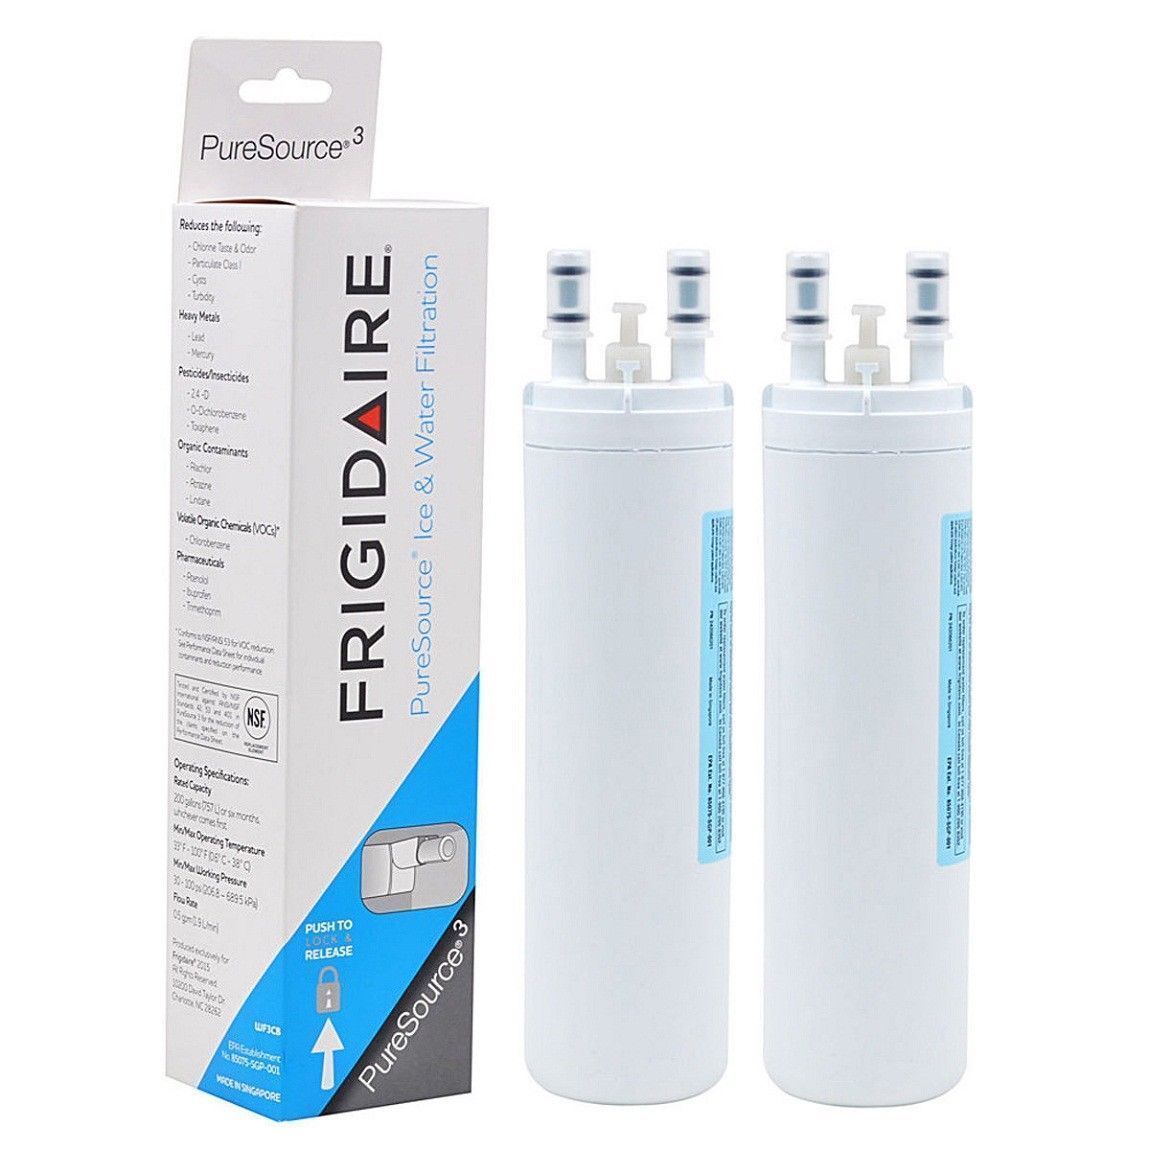 2 PACK Fit Frigidaire WF3CB Pure Source 3 Refrigerator Water